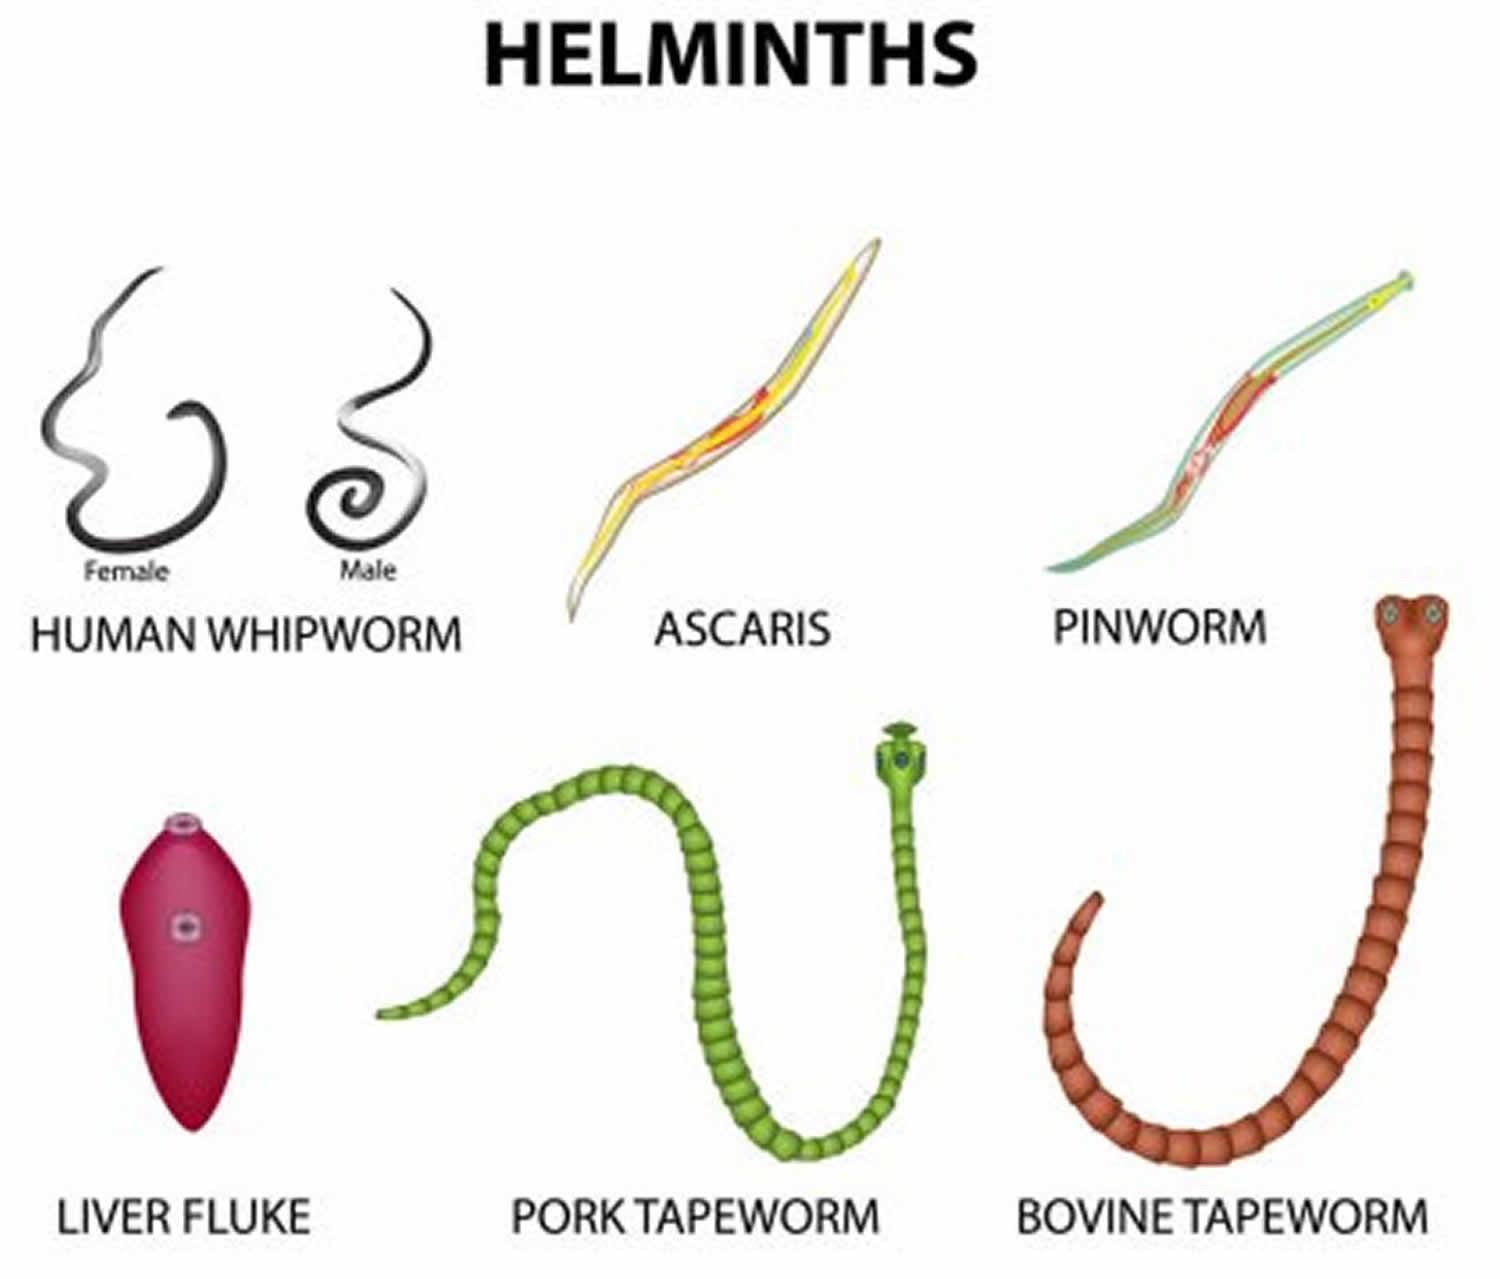 what does helminth mean in medical terms